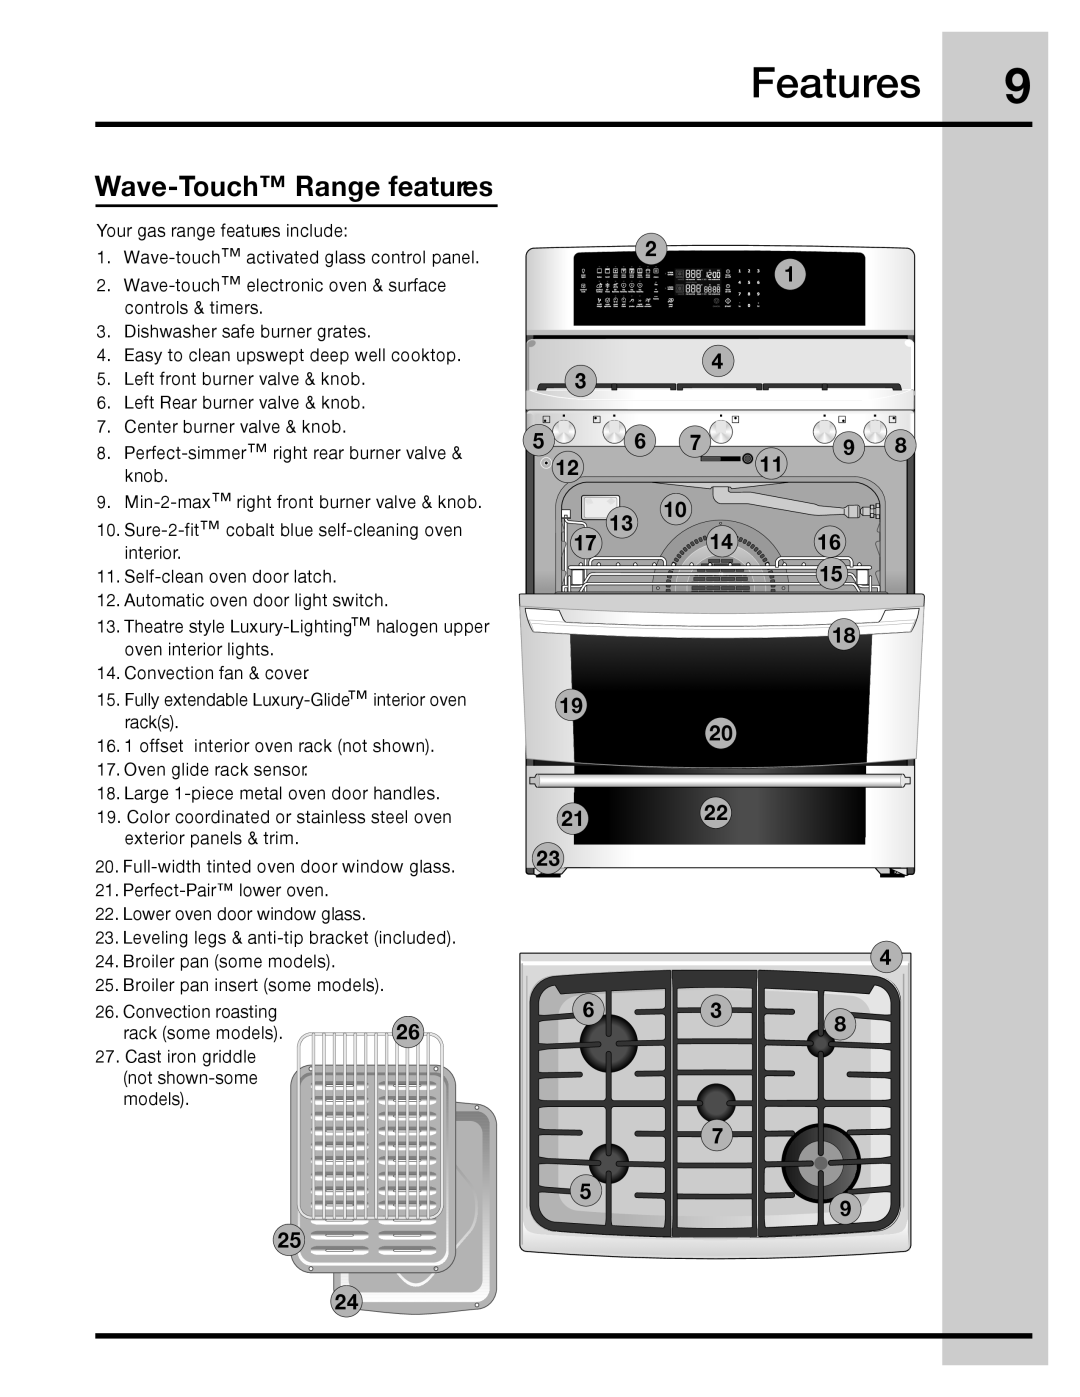 Electrolux 316471113 manual Wave-Touch Range features, 2122, Features 